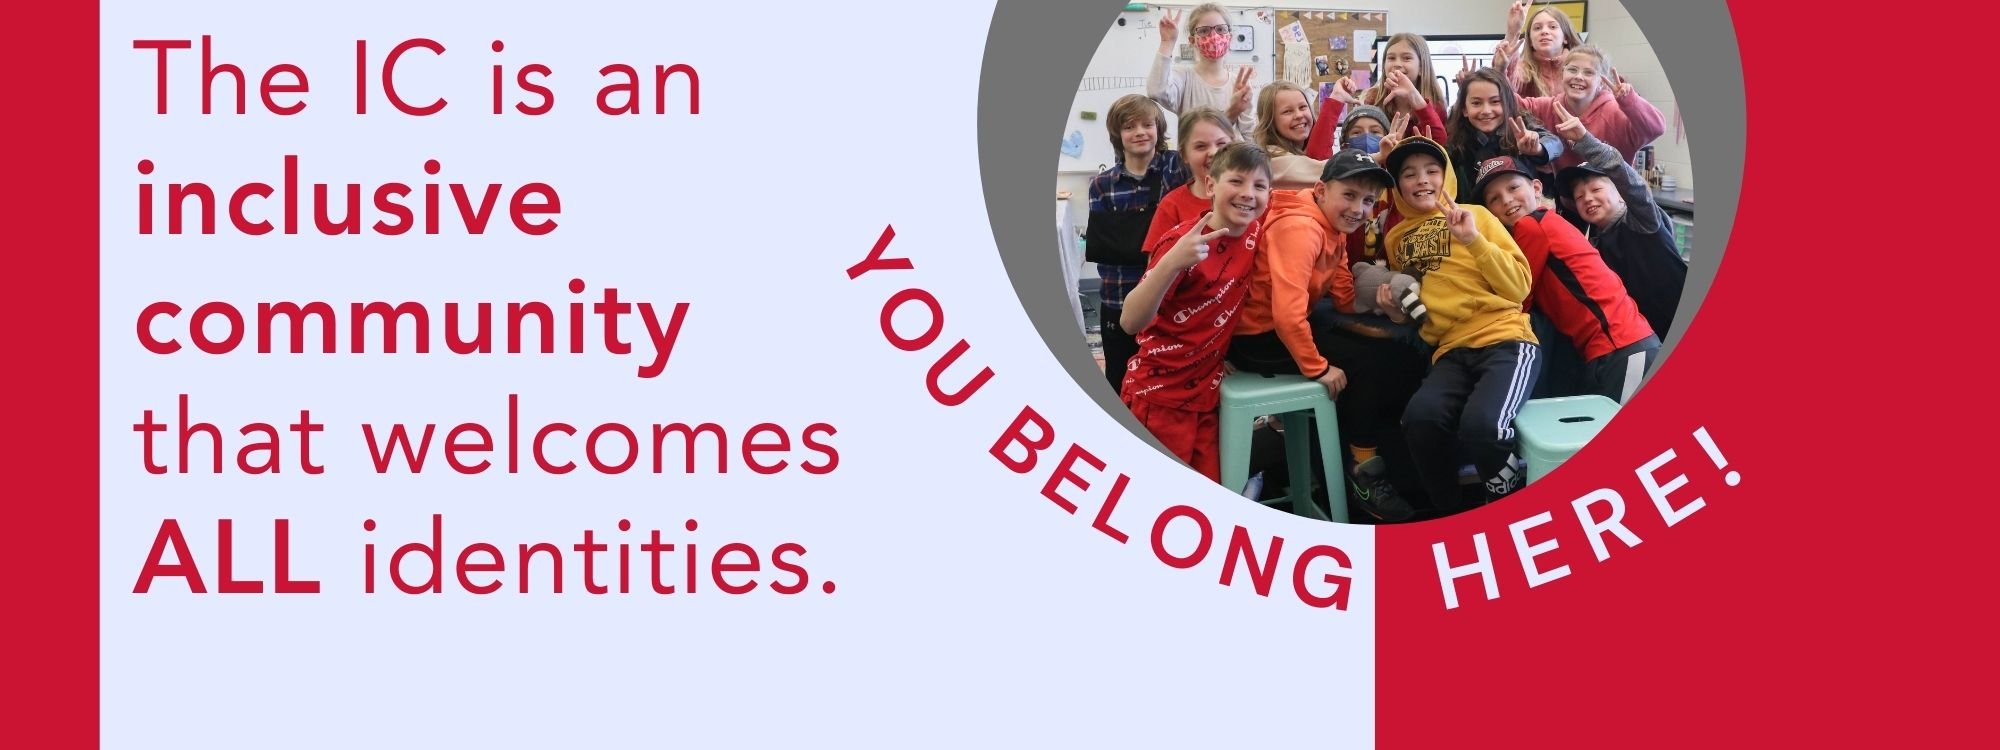 The IC is an inclusive community that welcomes ALL identities. You belong here!